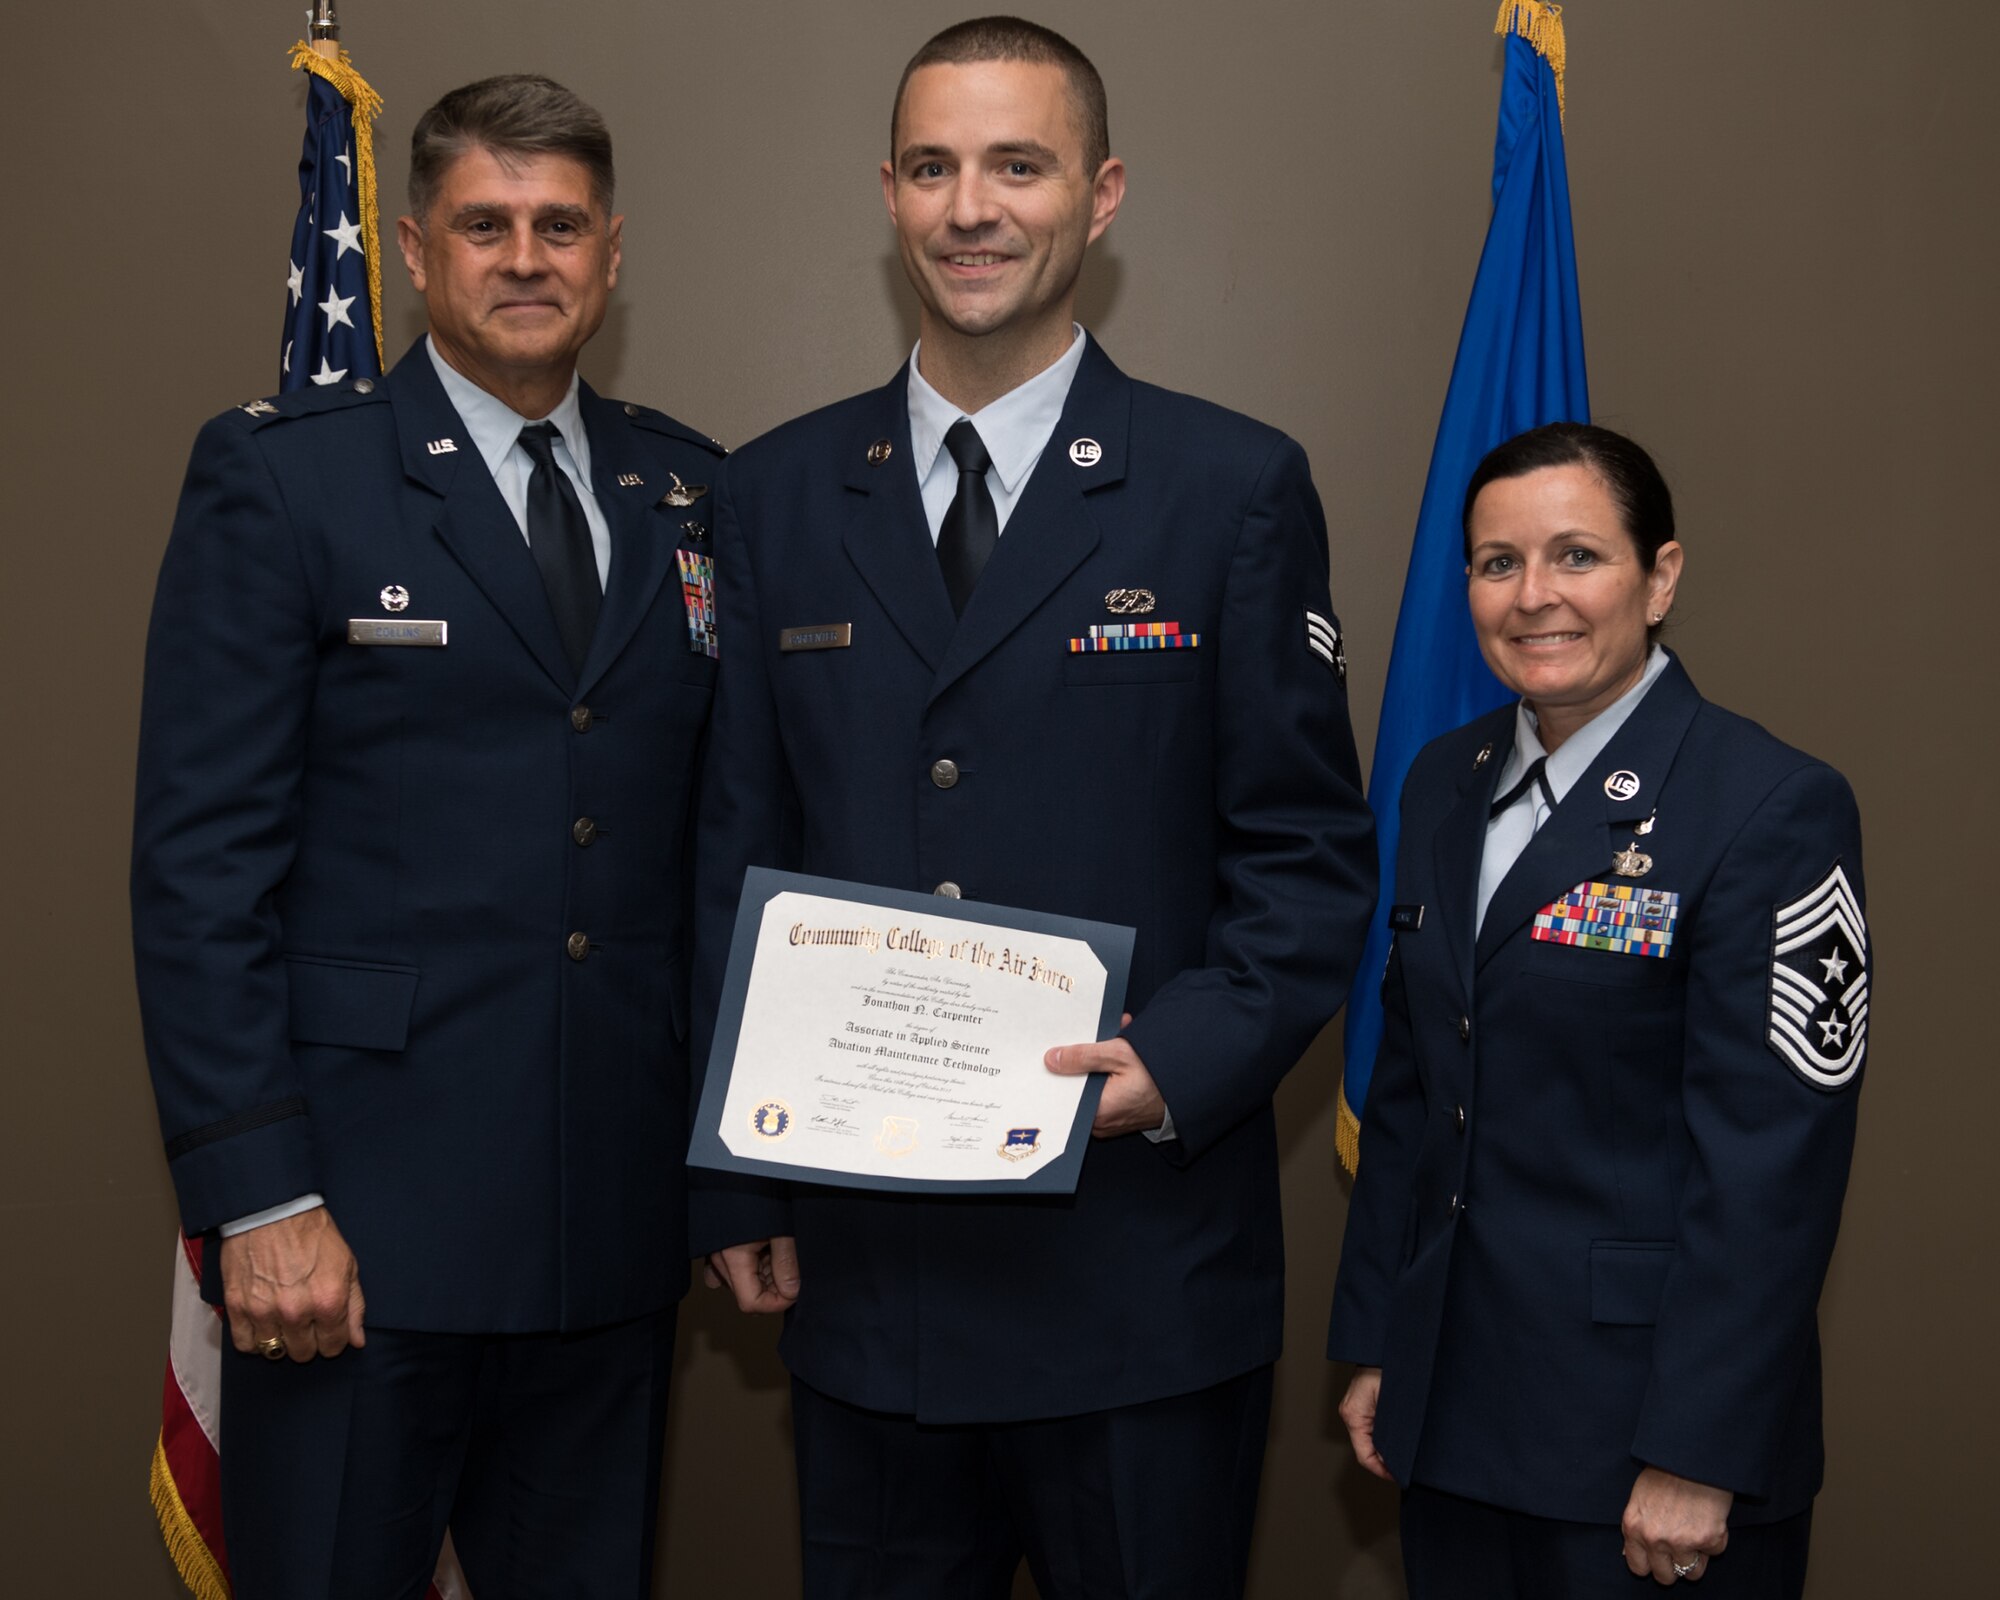 Senior Airmen Jonathon Carpenter, with the 932nd Airlift Wing, receives his Community College of the Air Force associate degree in applied science certificate from 932nd AW commander, Col. Glenn Collins during a CCAF graduation ceremony, June 2, 2019, Scott Air Force Base, Illinois. Wing leadership and fellow Airmen joined the graduates to celebrate their higher education accomplishment. (U.S. Air Force photo by Master Sgt. Christopher Parr)